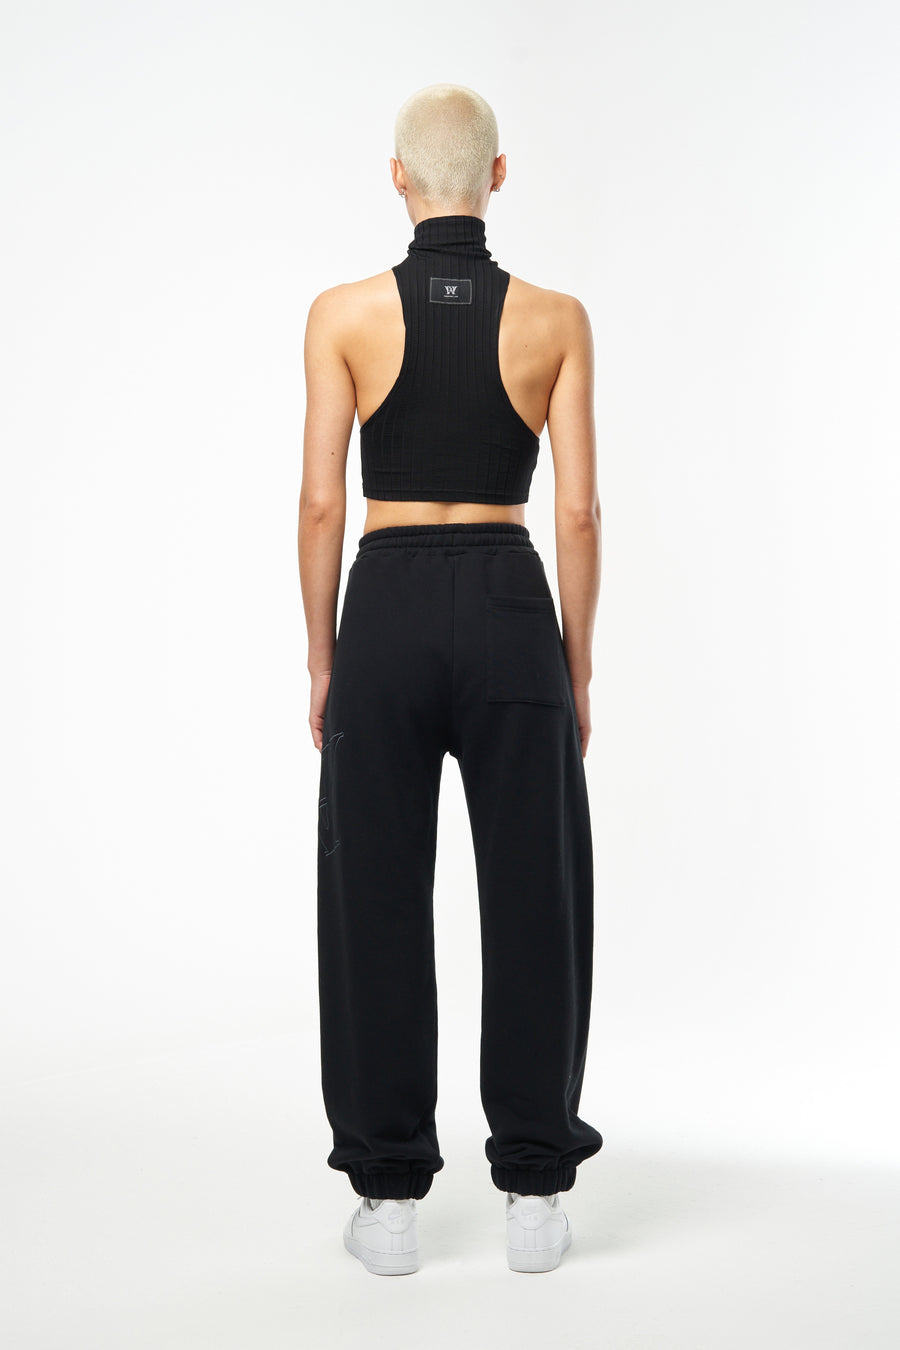 Turtle Neck Black Crop Top With Daring Cut Out Sleeves